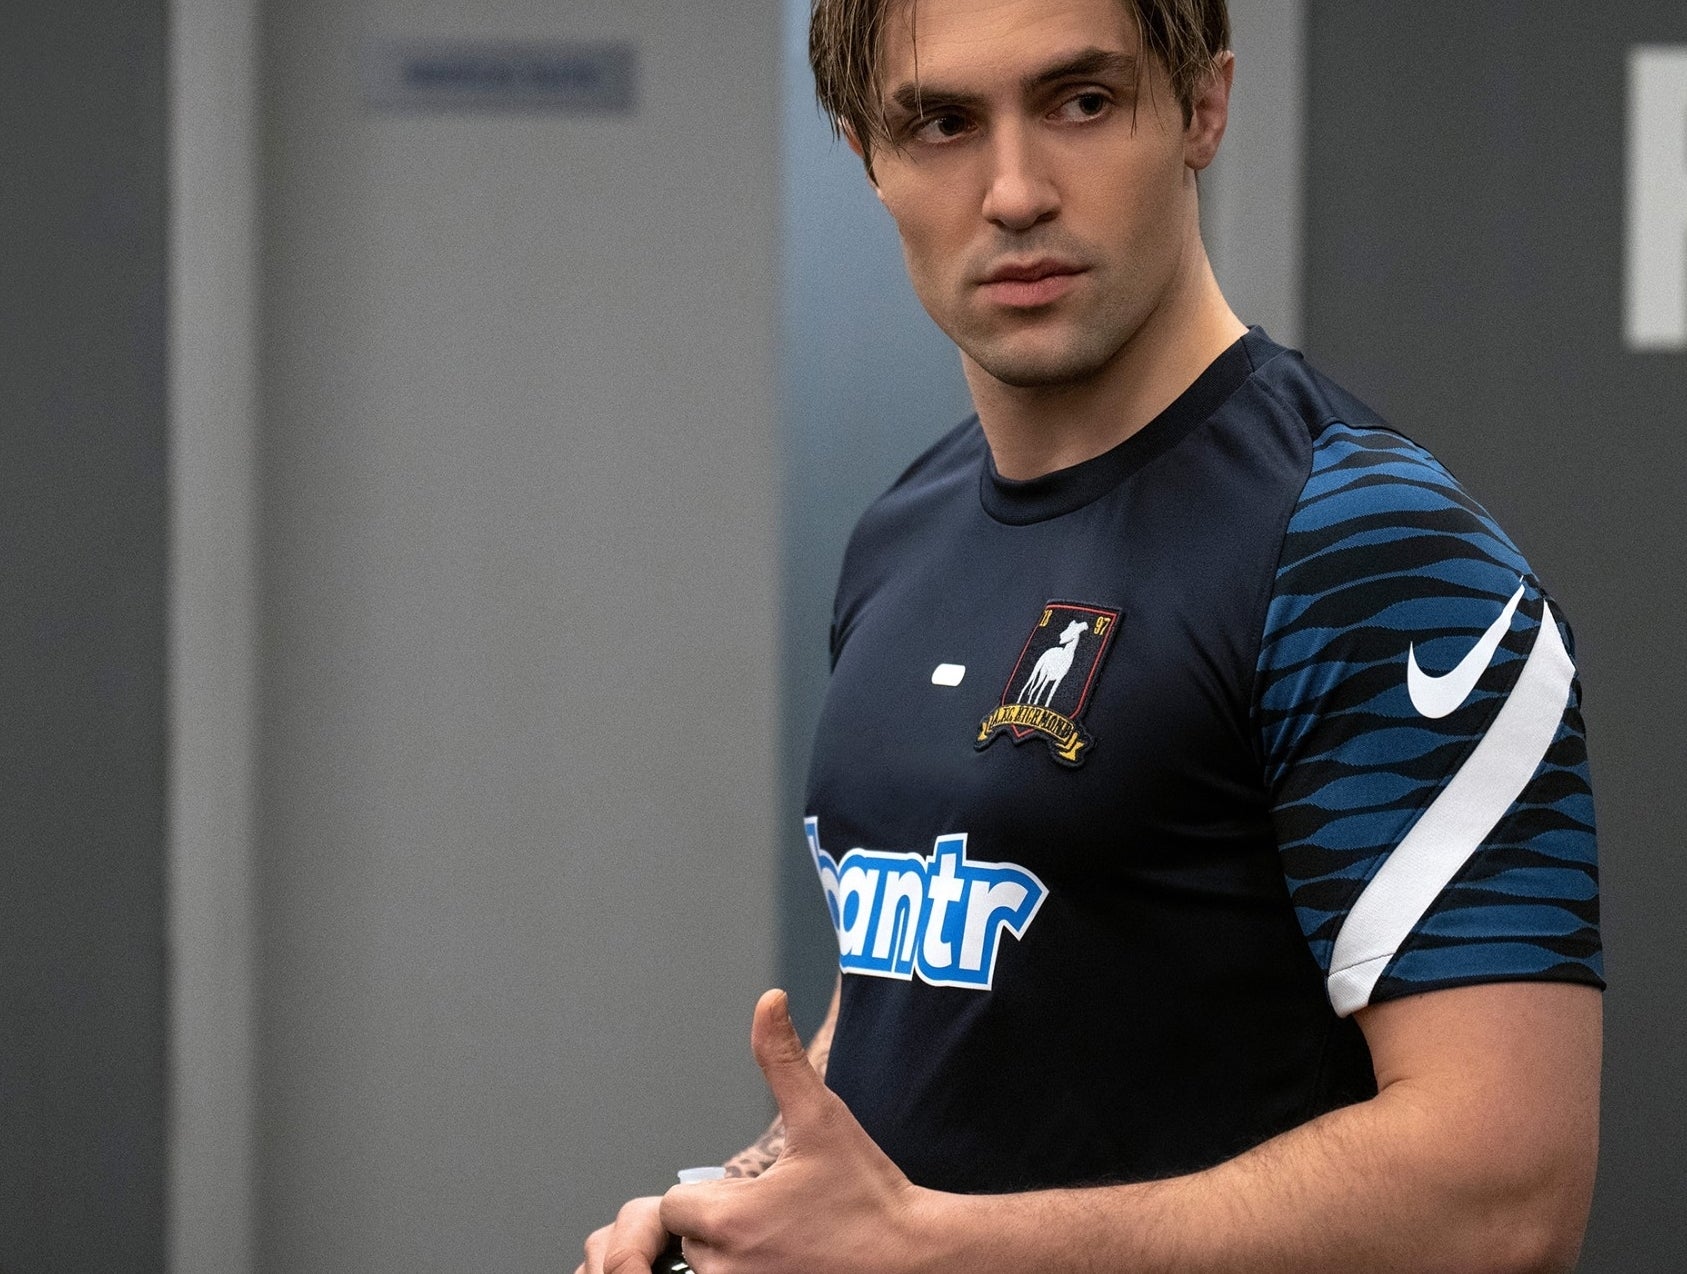 TV character in a soccer jersey stands in an office setting, looking off-camera